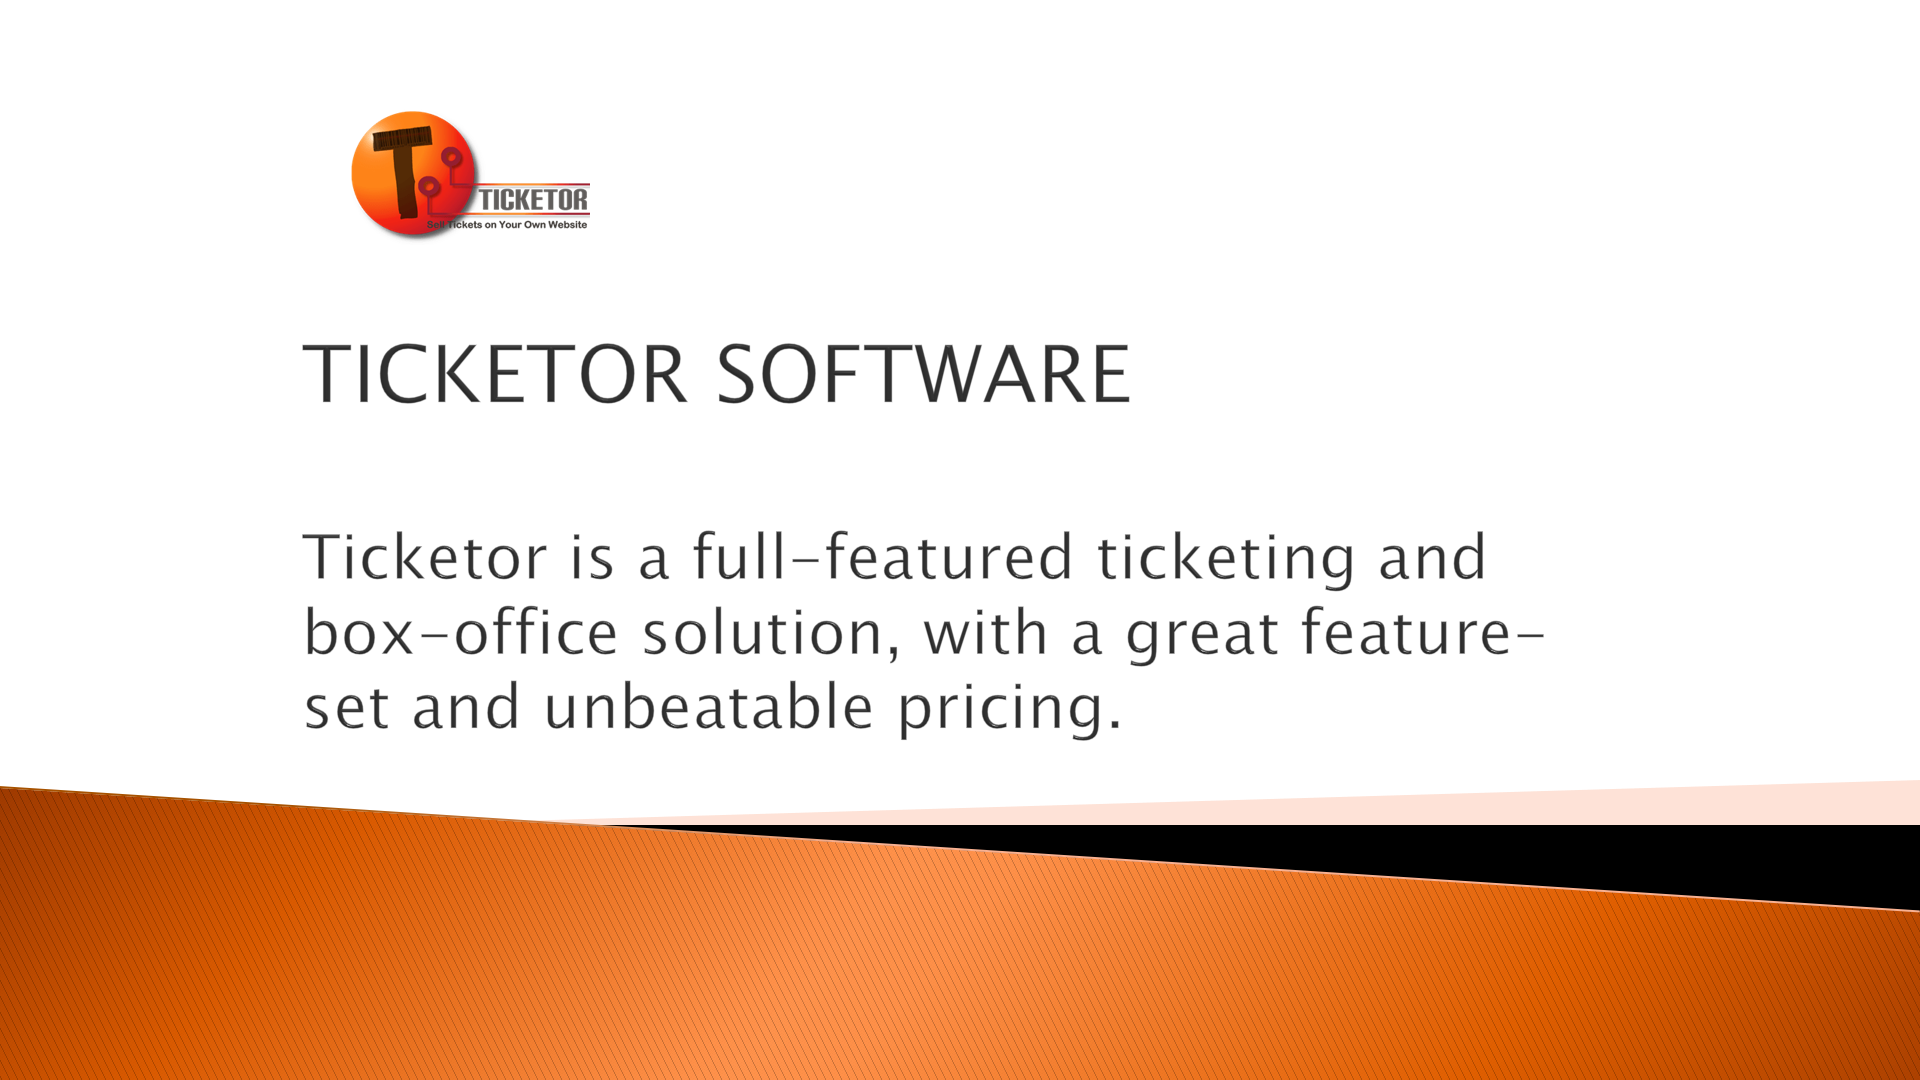 What is Ticketor?